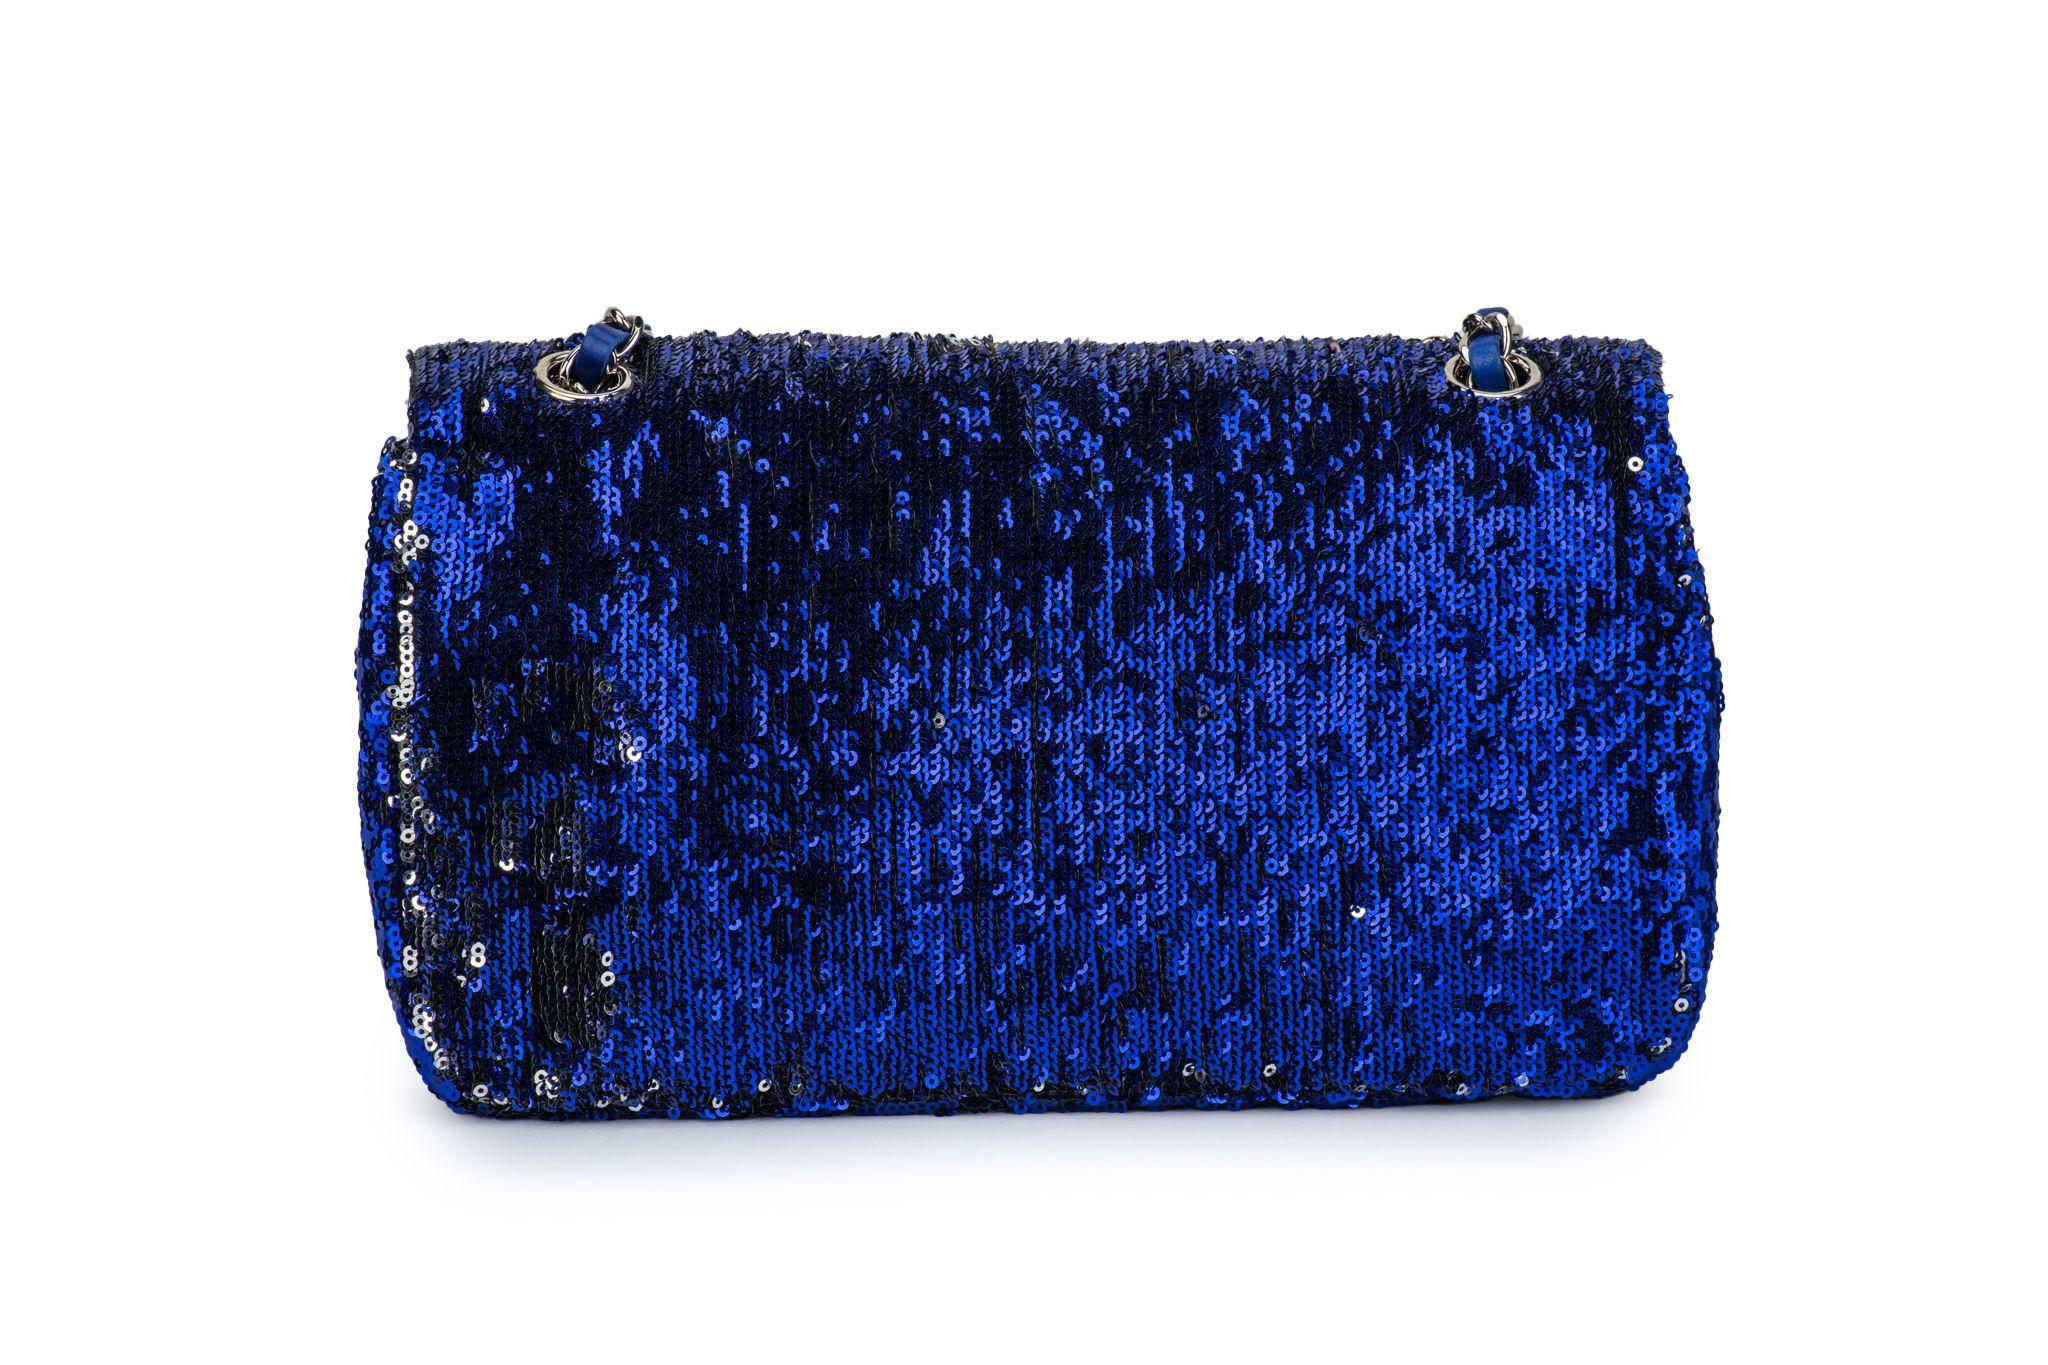 Chanel Classic Single Flap Bag made of sequins in blue and black. The hardware is silver and the chain has a drop of 9”/17”. Collection #17, 2012/2013. The bag is in excellent condition and comes with the original dustcover, the hologram and the ID